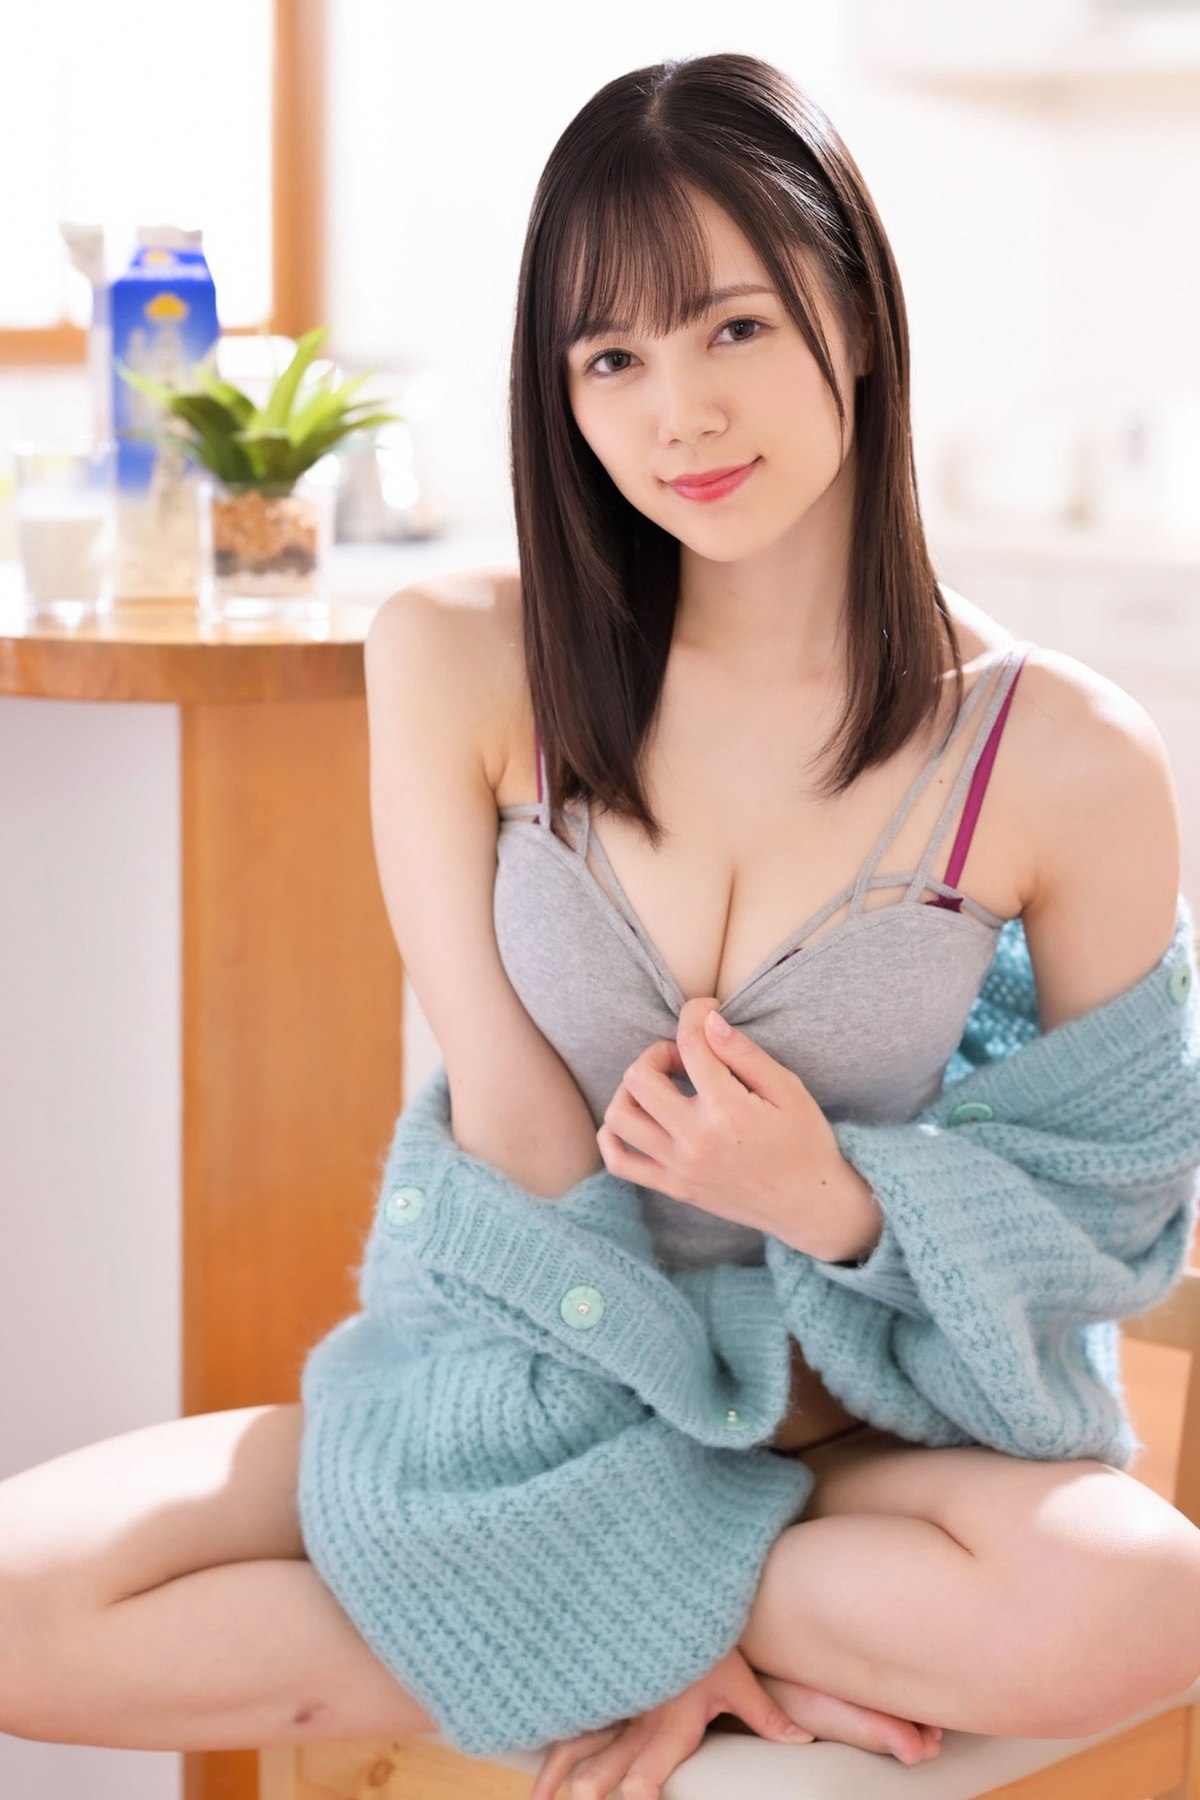 Photobook Remu Suzumori 涼森れむ Ejaculates And Lives Together A 0038 7644431542.jpg